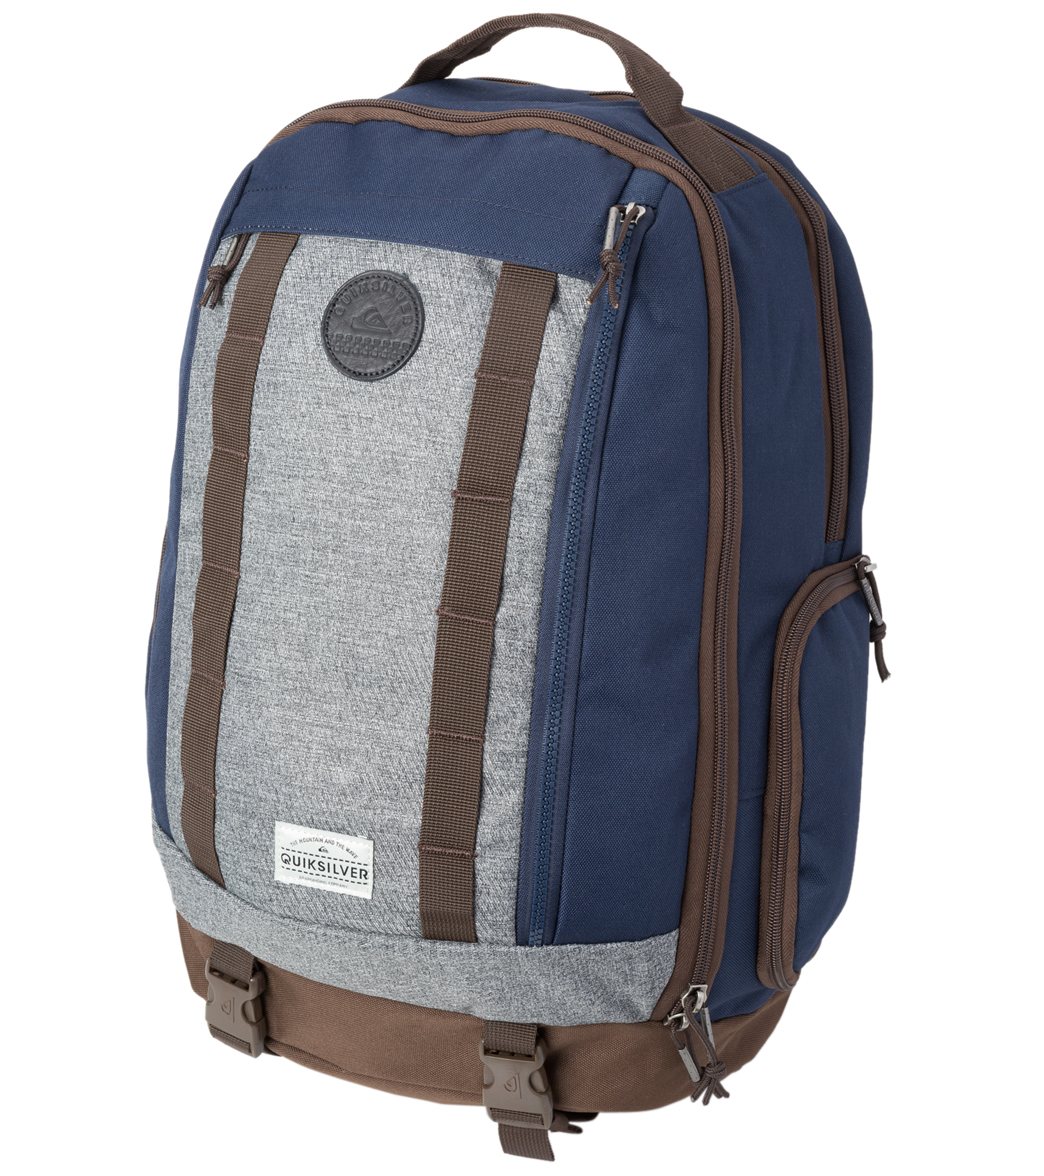 Quiksilver Holster Backpack at SwimOutlet.com - Free Shipping